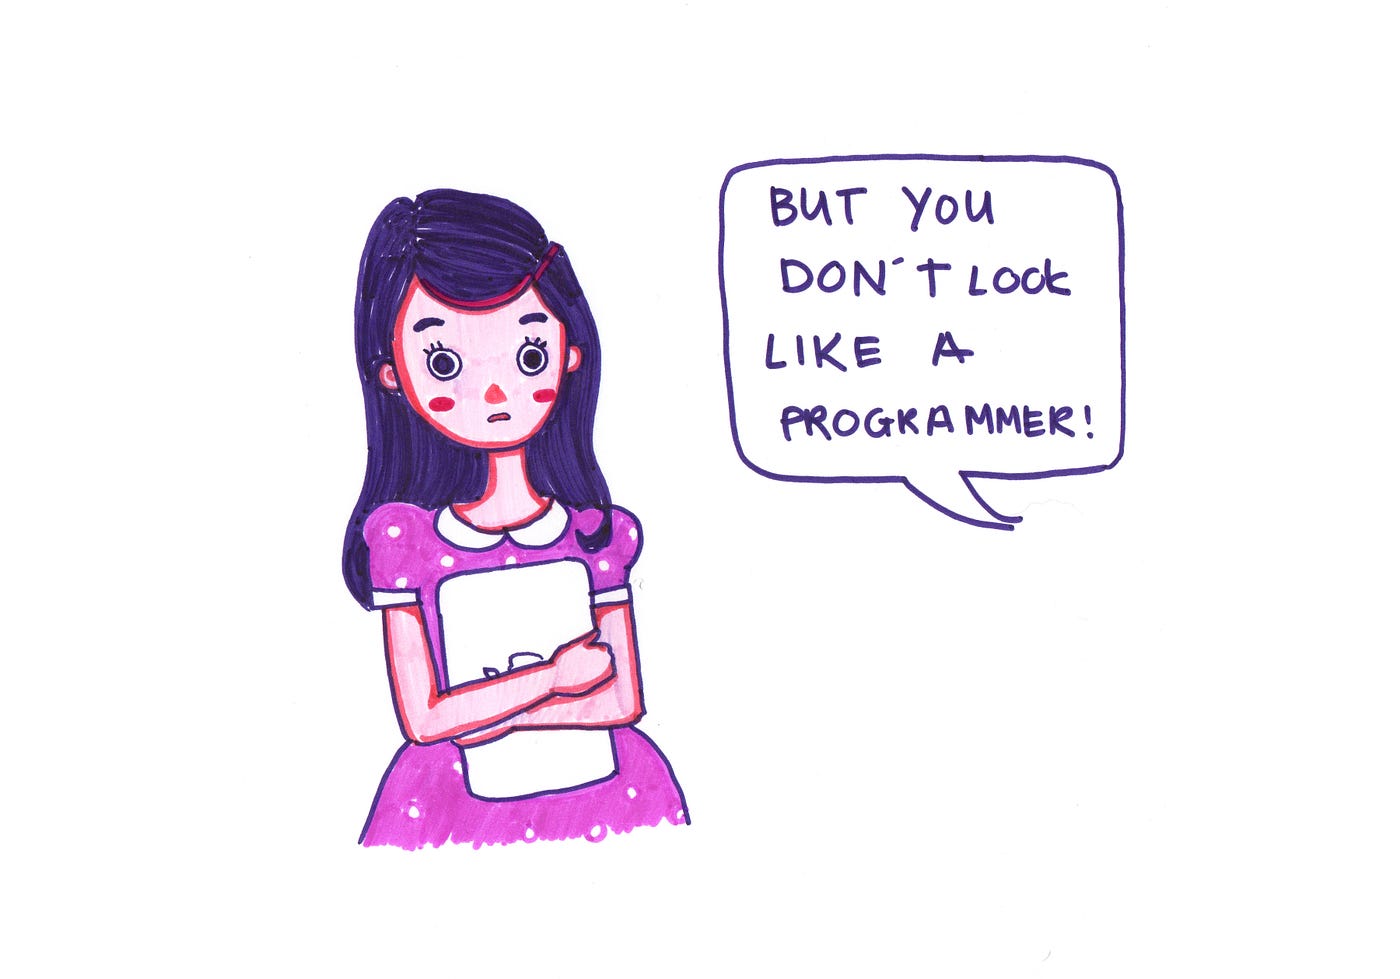 "But you don't look like a programmer!"